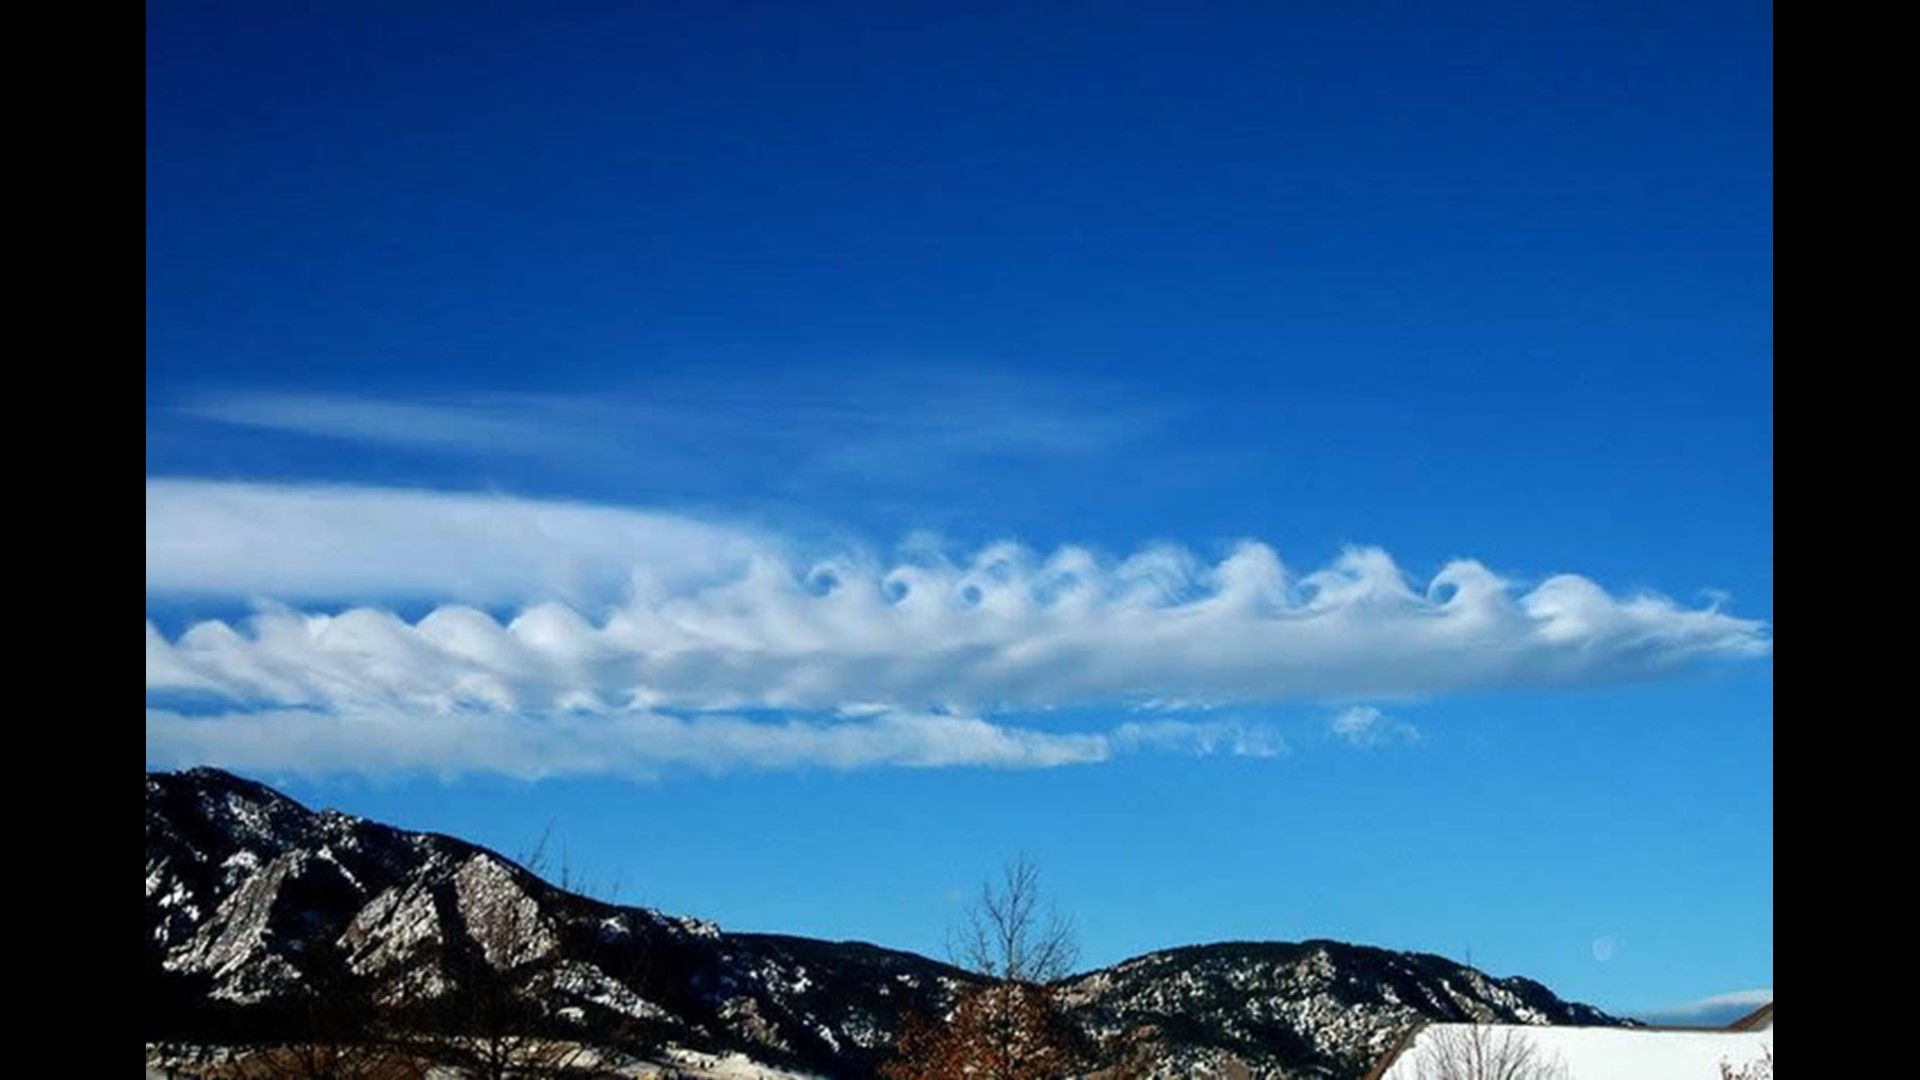 These clouds resemble waves breaking on an ocean surface, but what exactly are they? How are they formed?